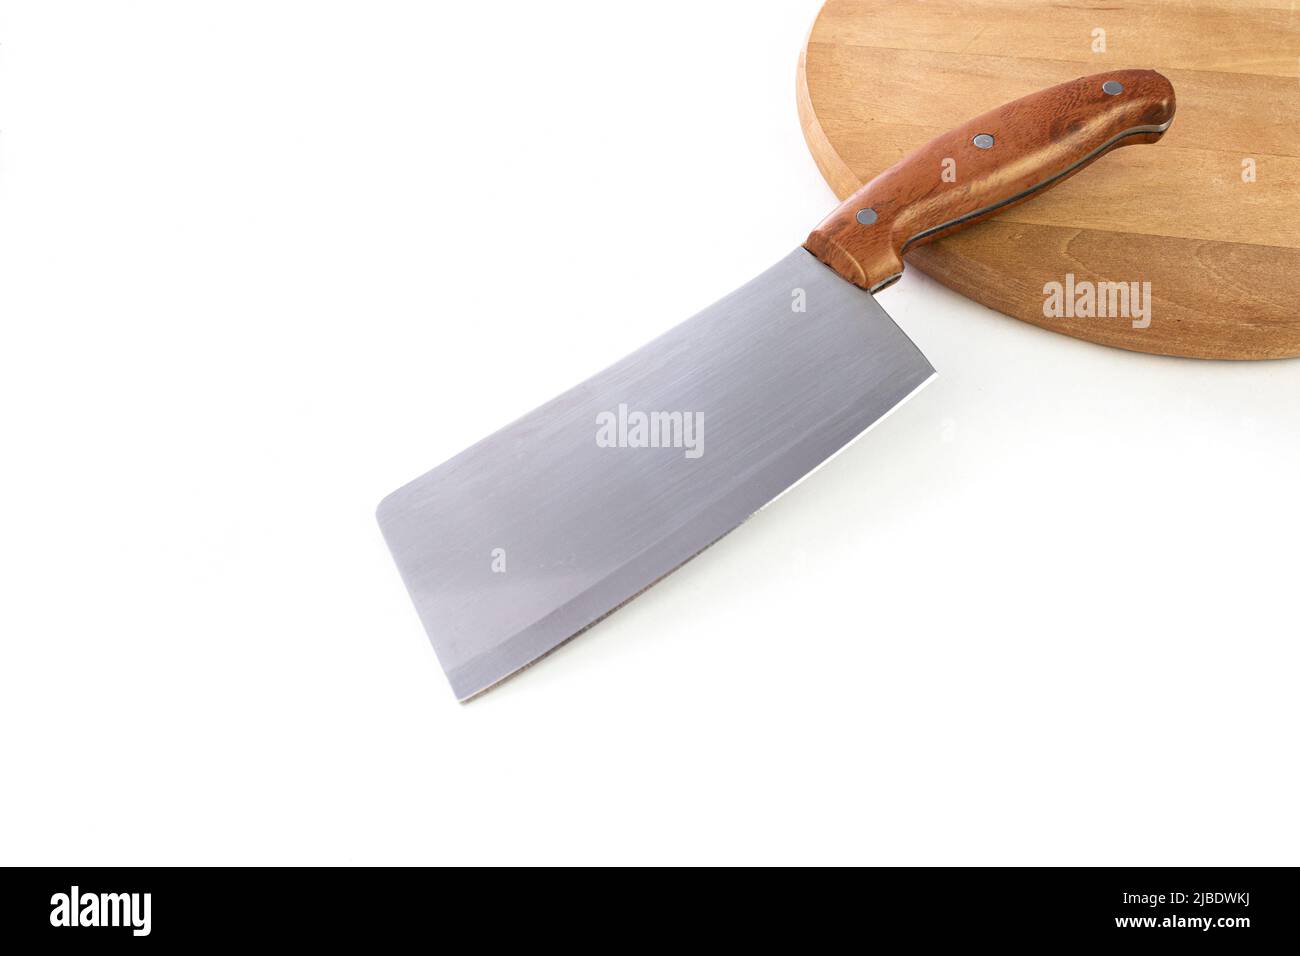 Chef's kitchen knife lay on wooden board and white background. Chef, restaurant or kitchen concept. Stock Photo